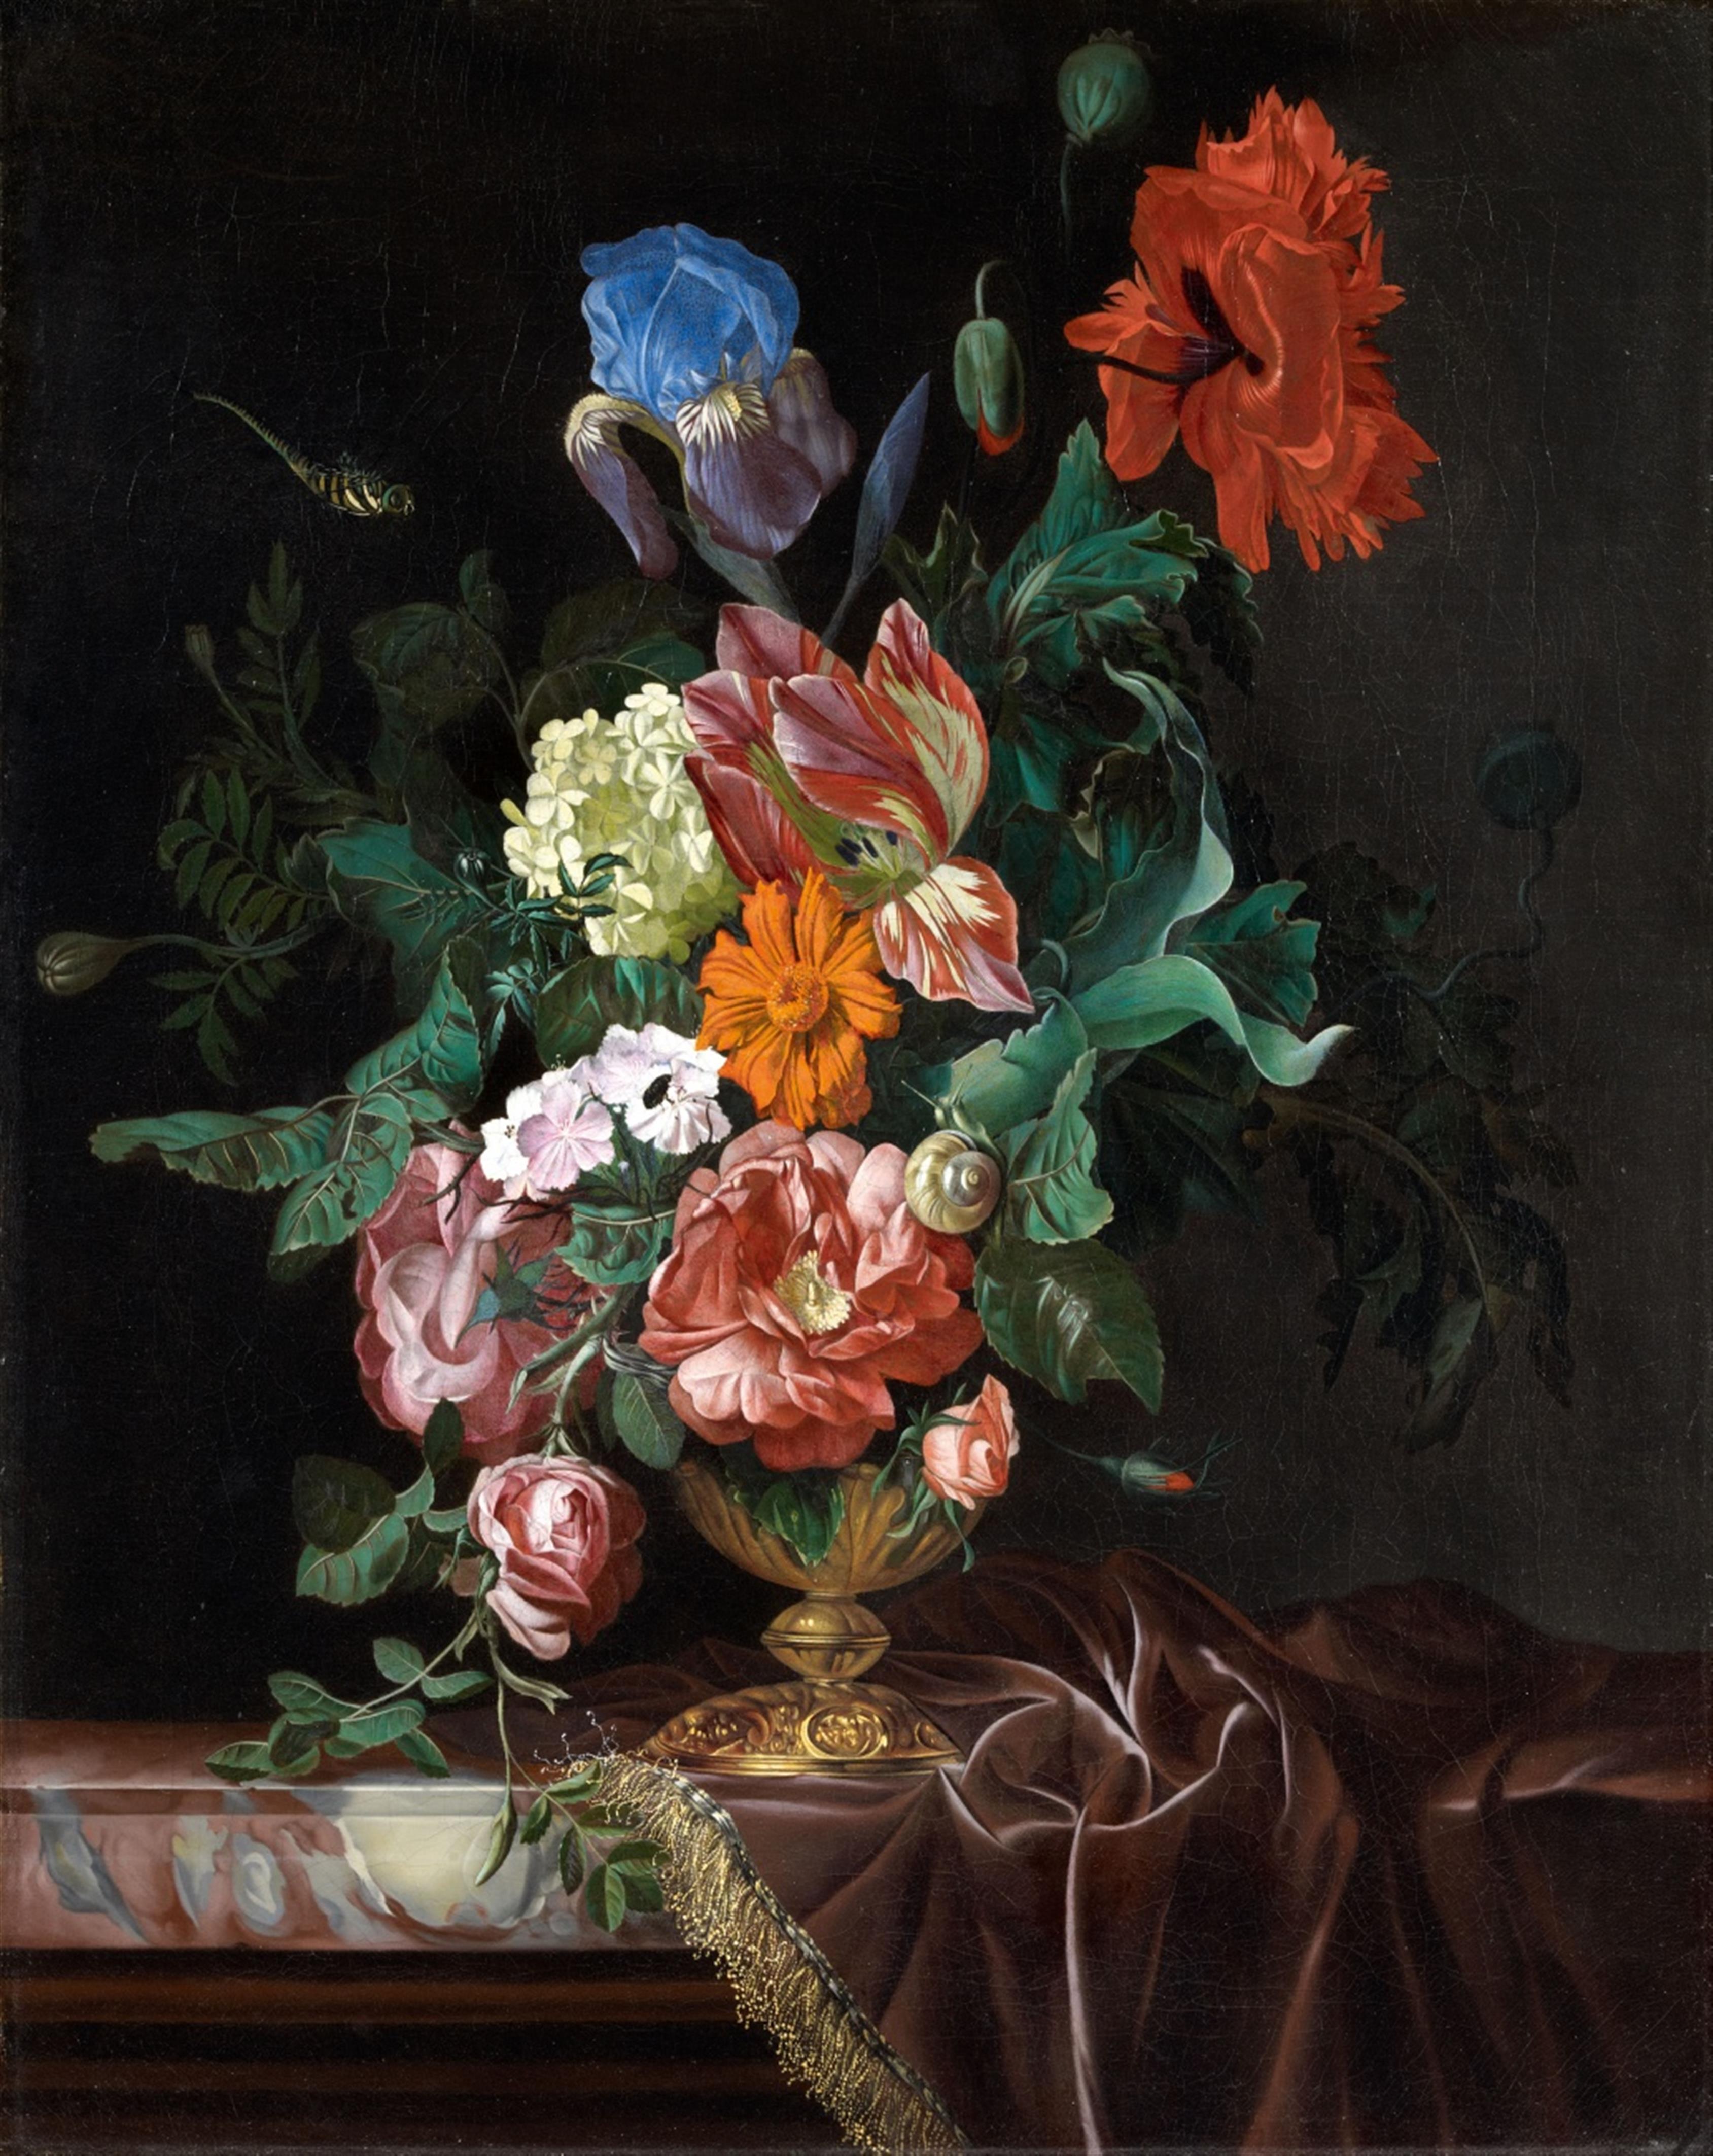 Nicolaes Lachtropius - Still Life with a Vase of Flowers and Insects - image-1